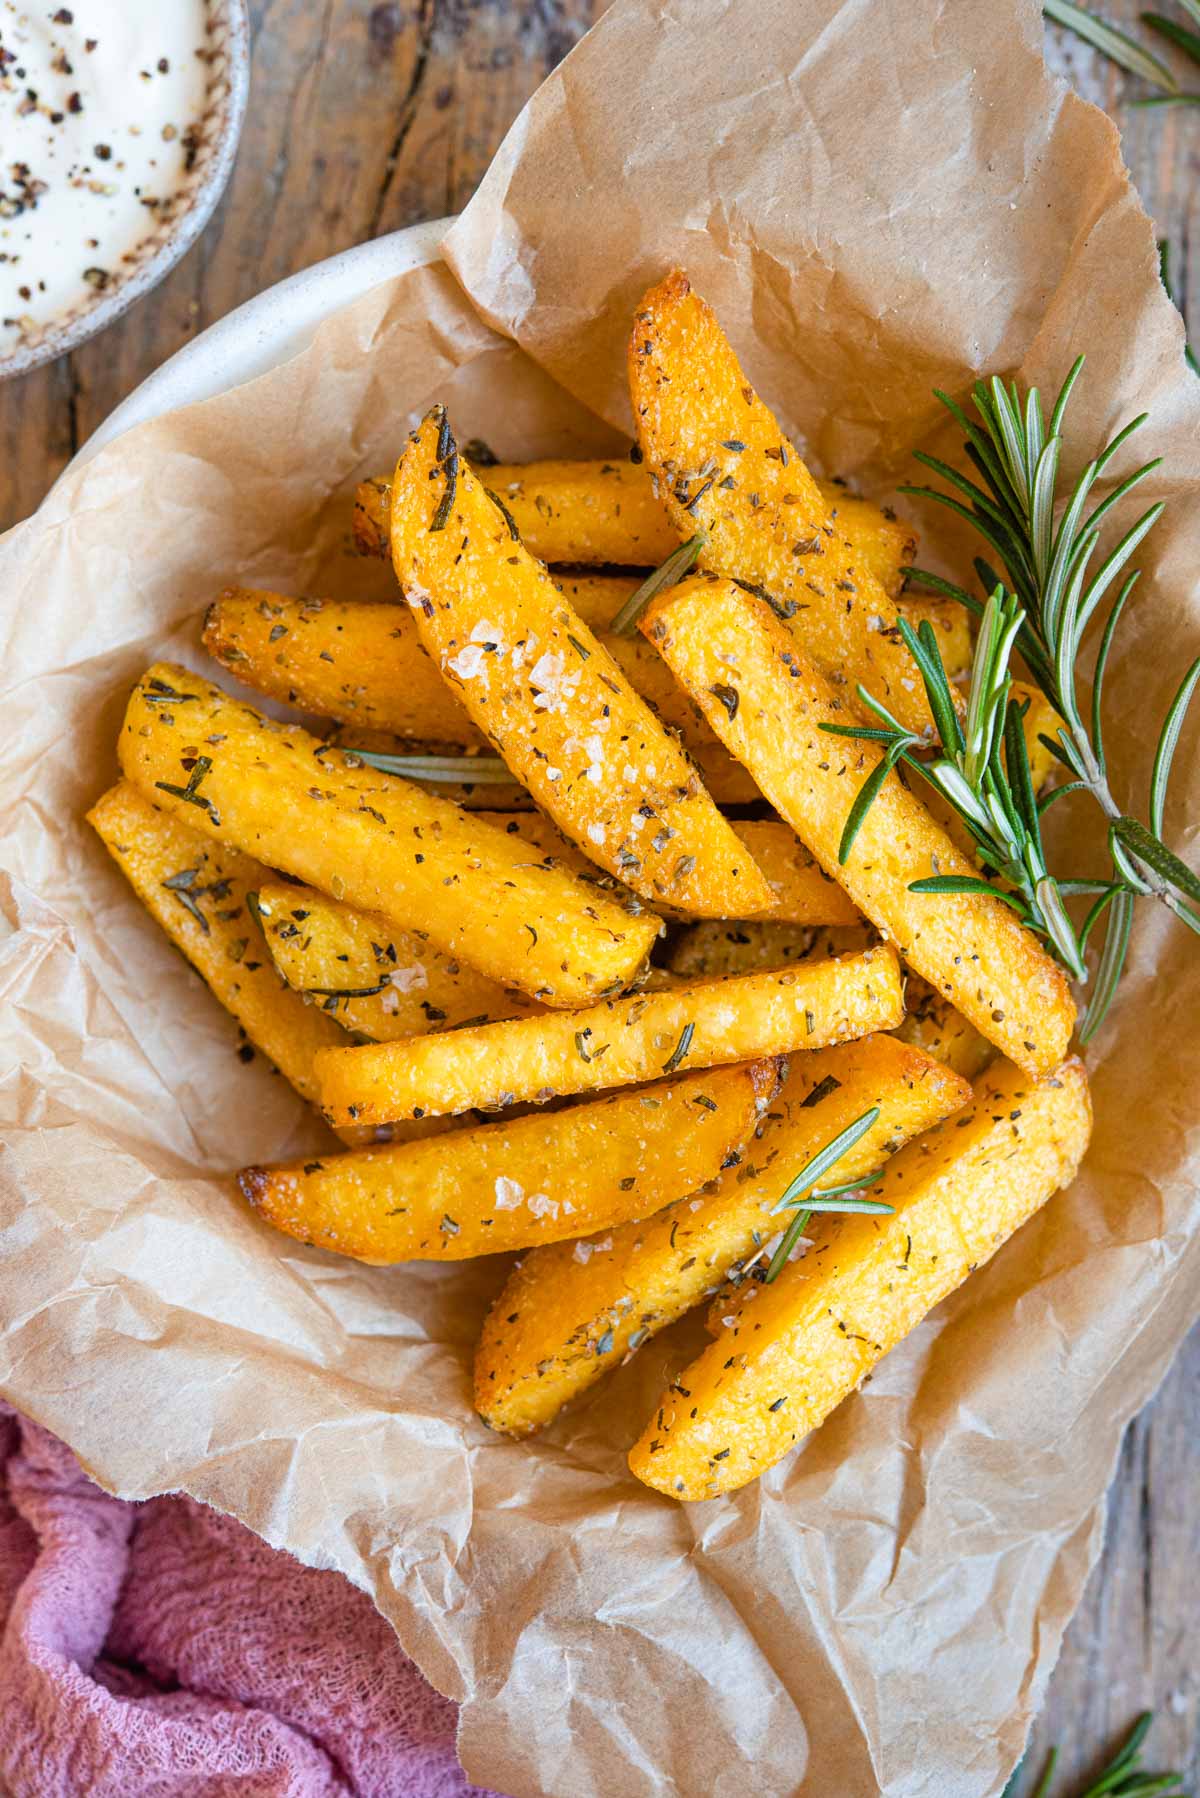 A close up of polenta cut into fries and served in a bowl with herbs